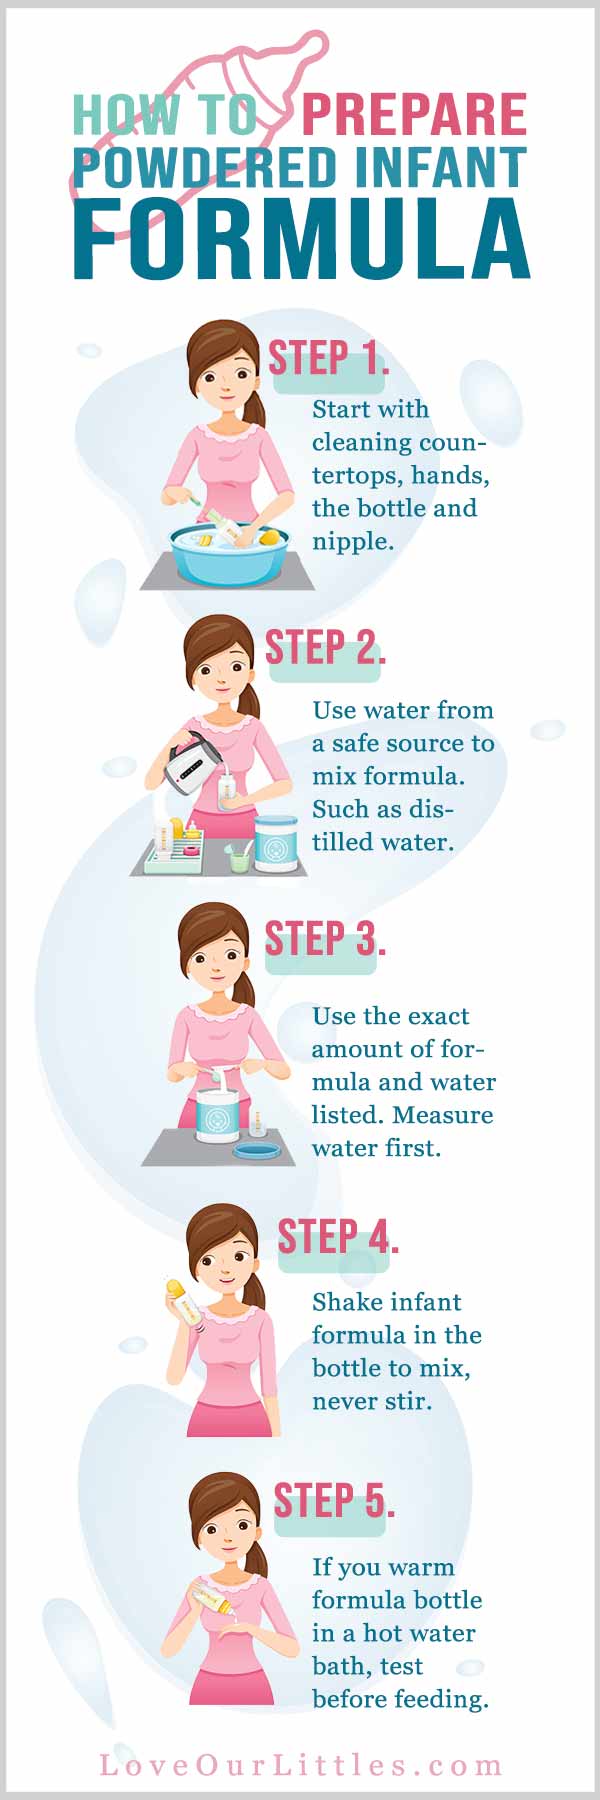 How to prepare formula in 5 steps infographic.